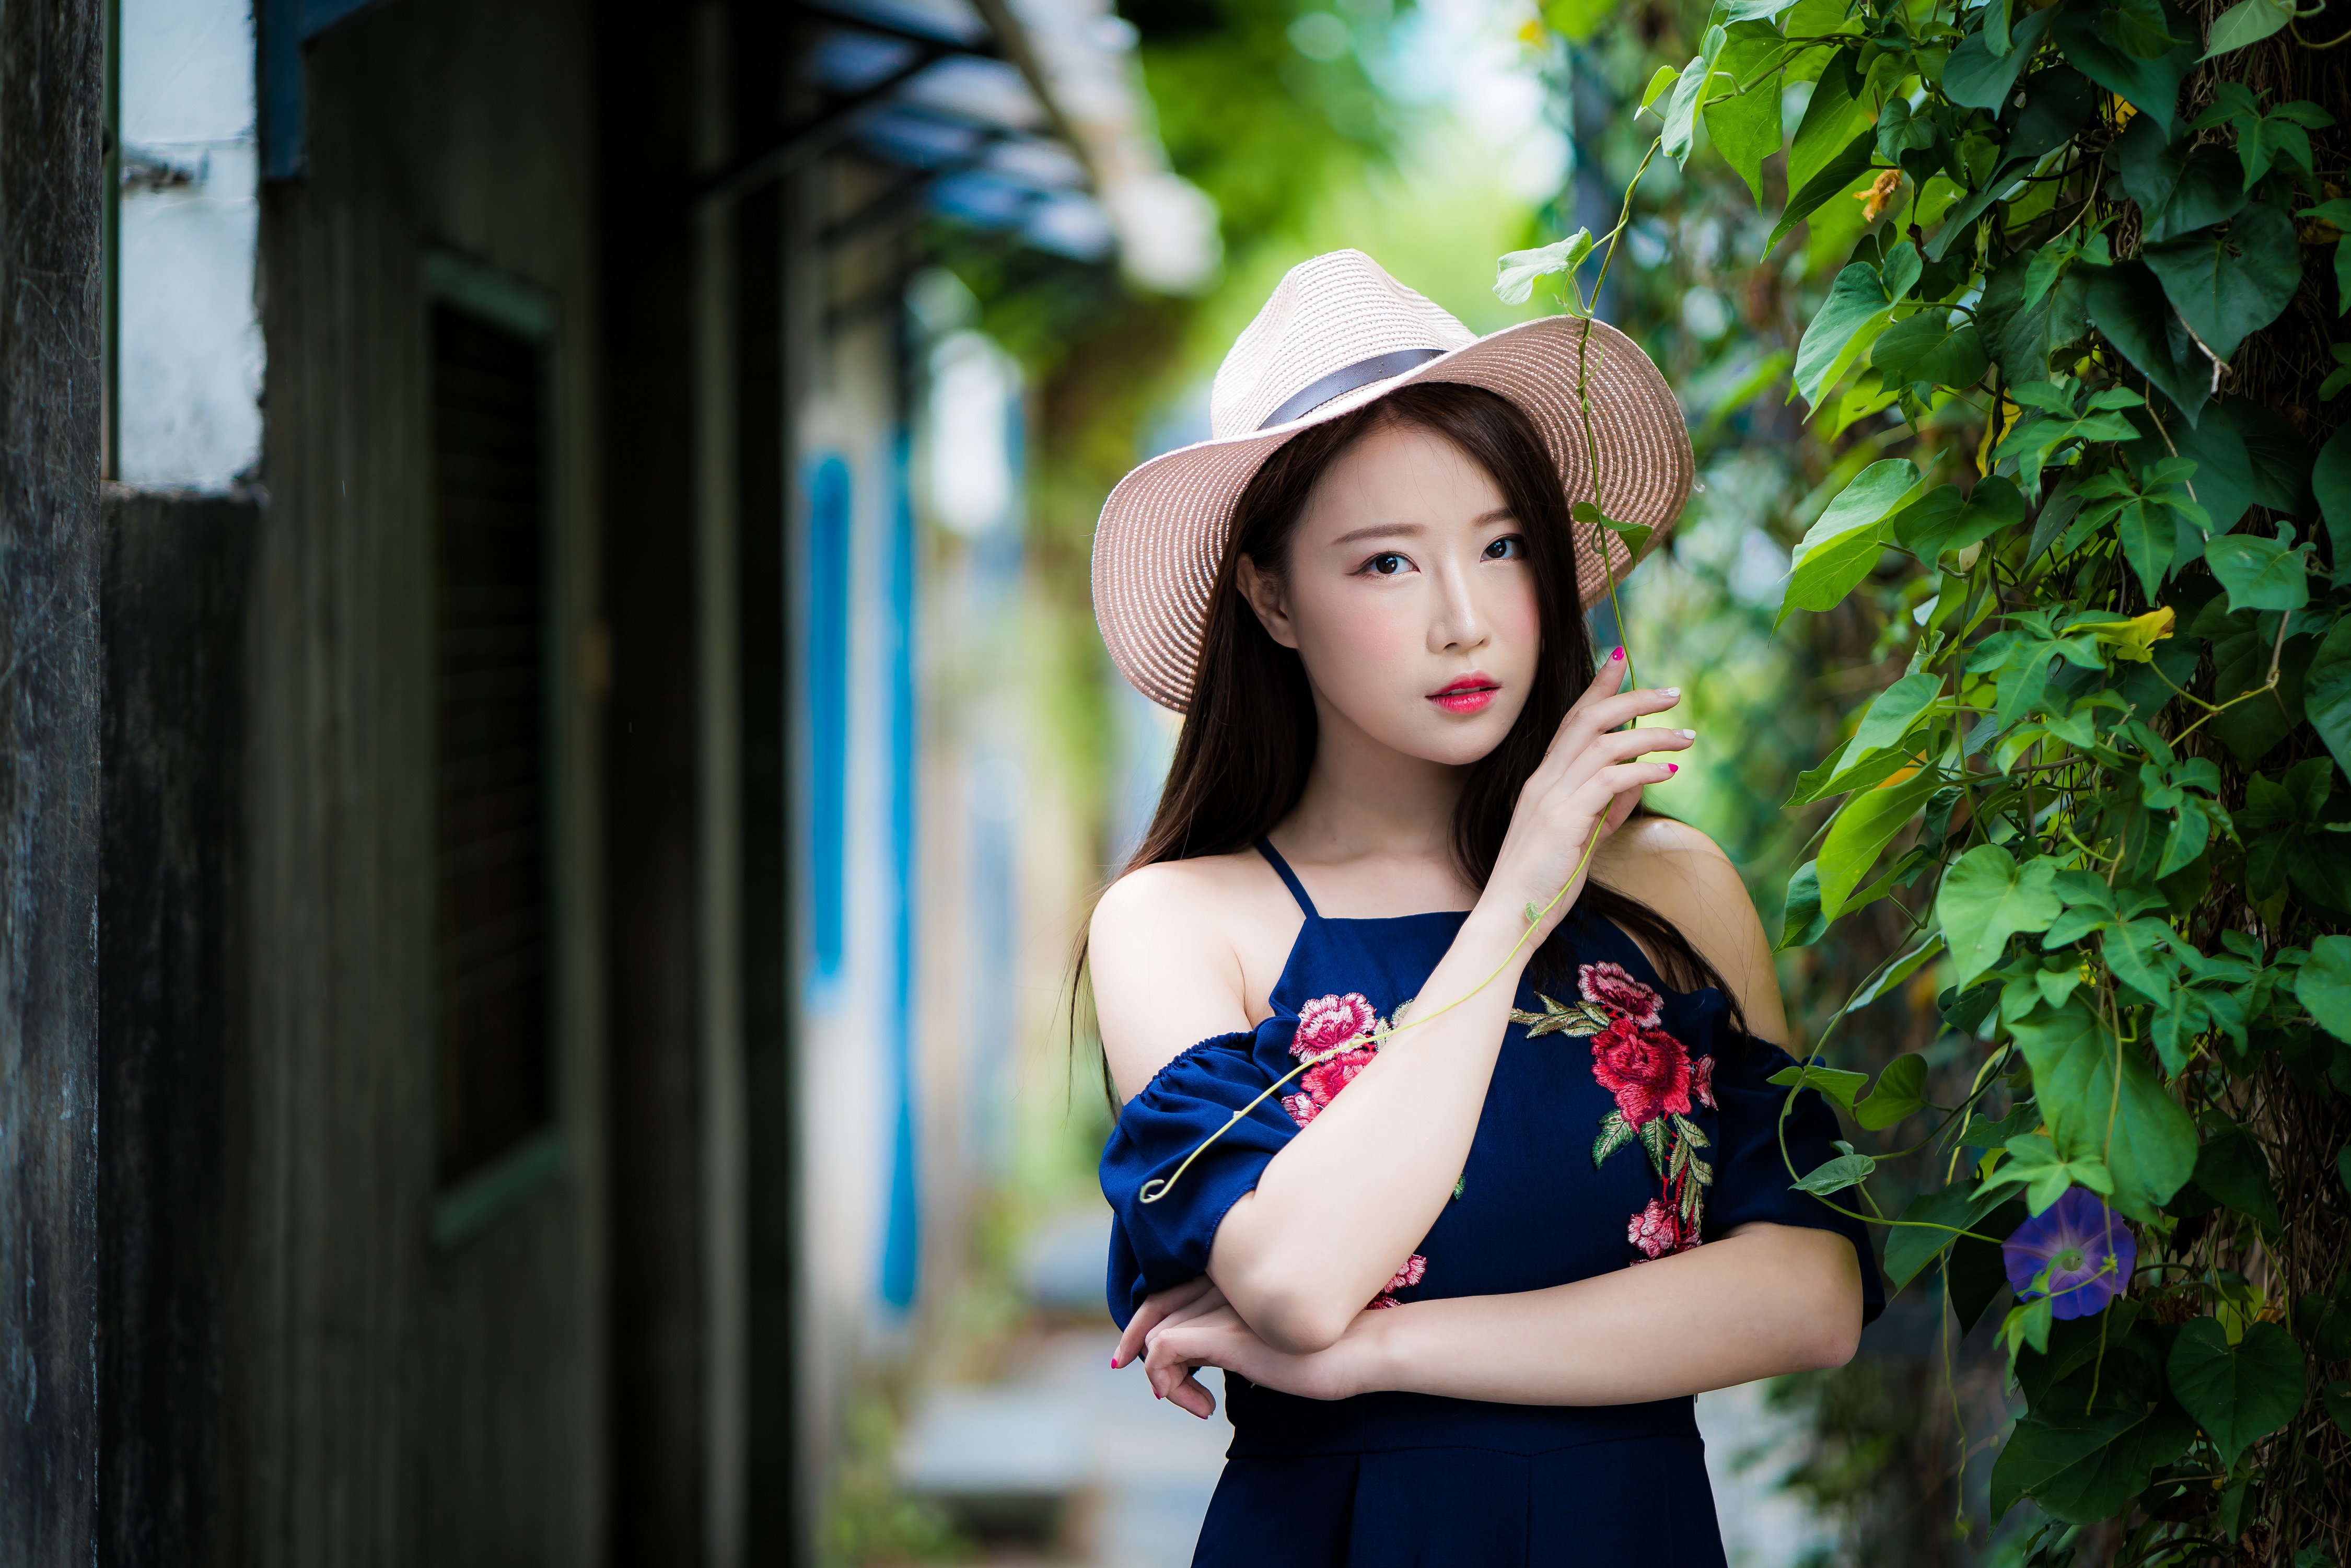 People 4500x3001 women model Asian brunette portrait outdoors depth of field bokeh looking at viewer women with hats dress bare shoulders arms crossed painted nails leaves plants women outdoors